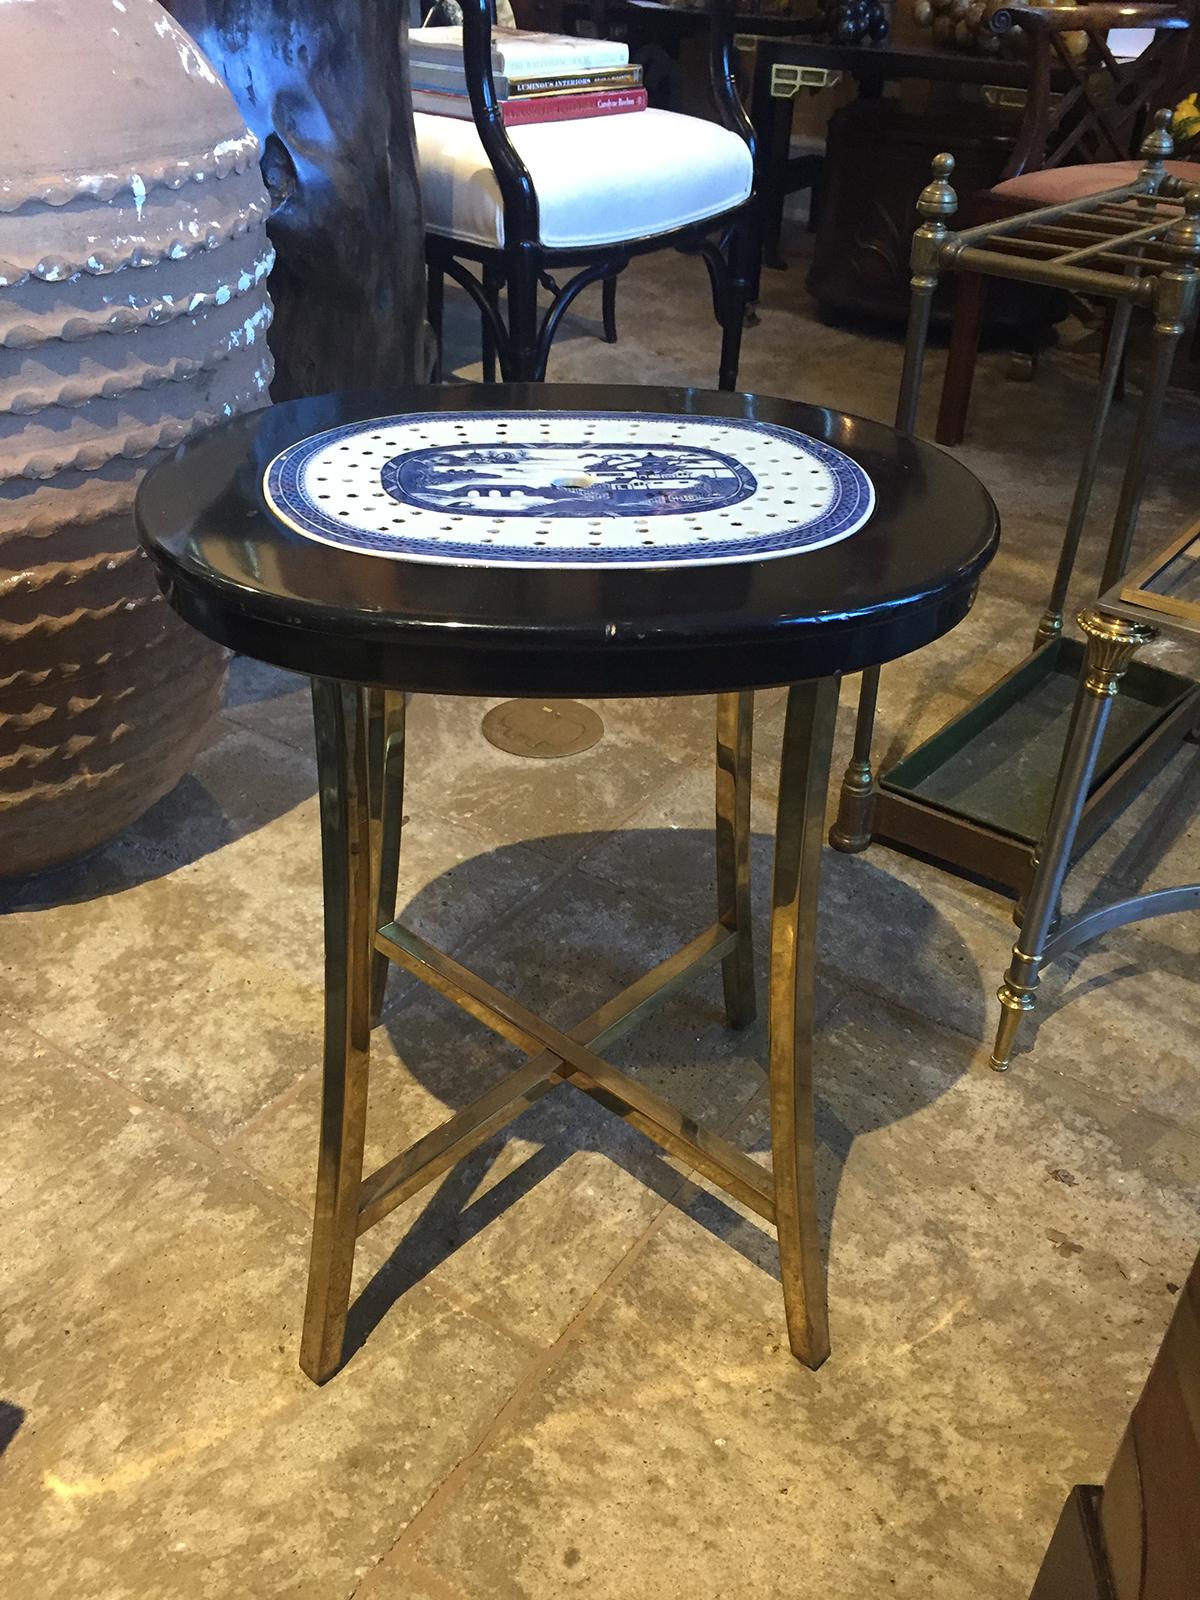 18th century canton blue & white porcelain strainer as custom made oval side table with brass legs.